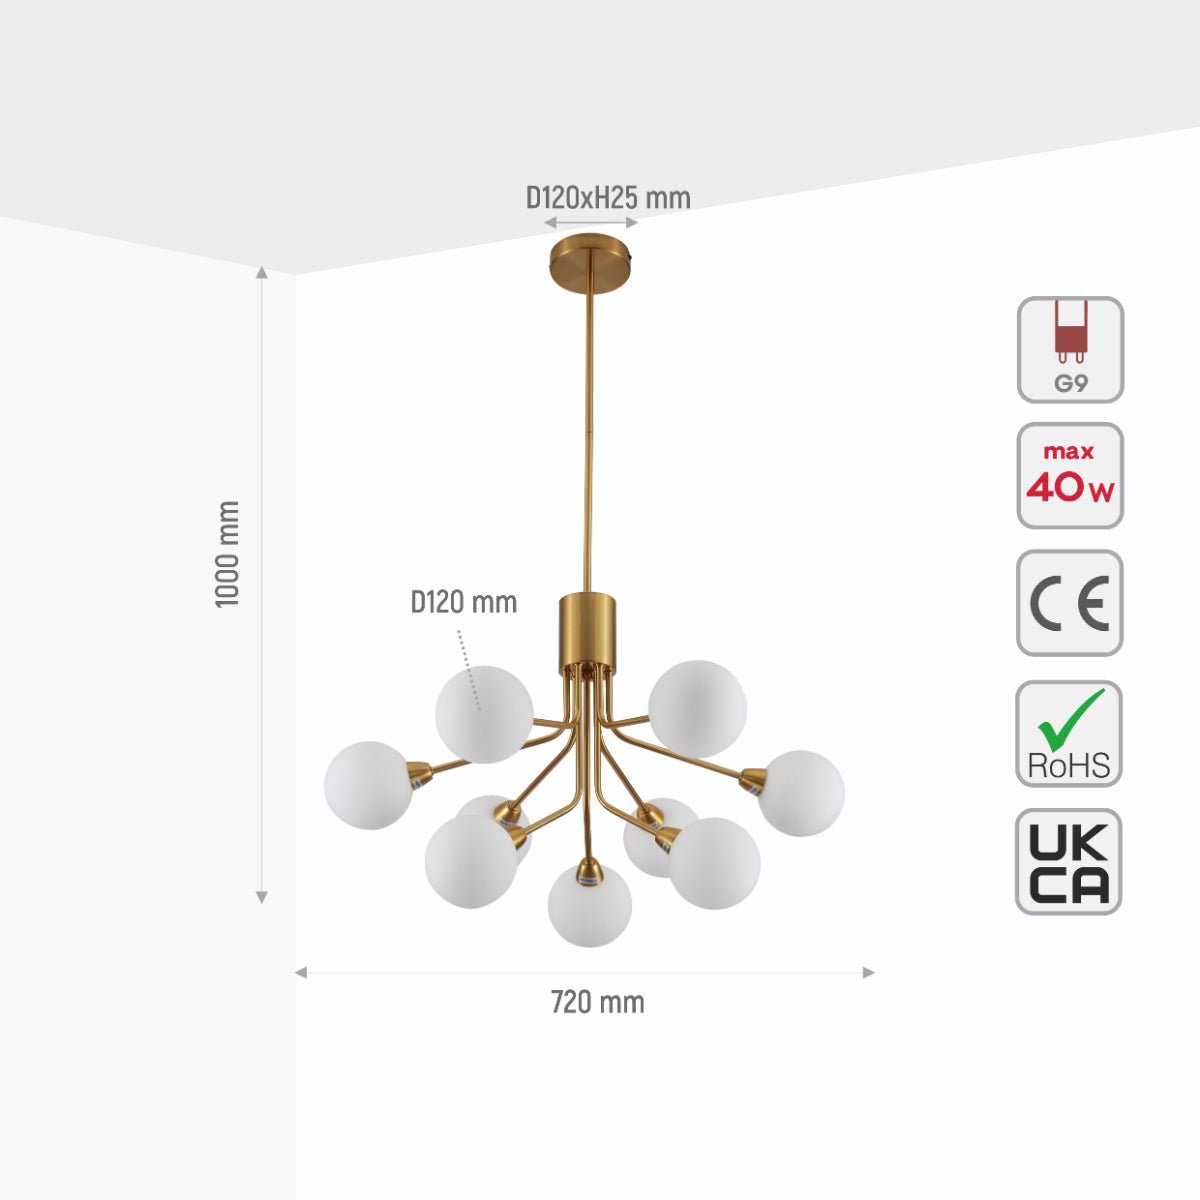 Size and specs of White Globe Glass Gold Arm Body Pendant Chandelier Ceiling Light with 9xG9 | TEKLED 159-17552